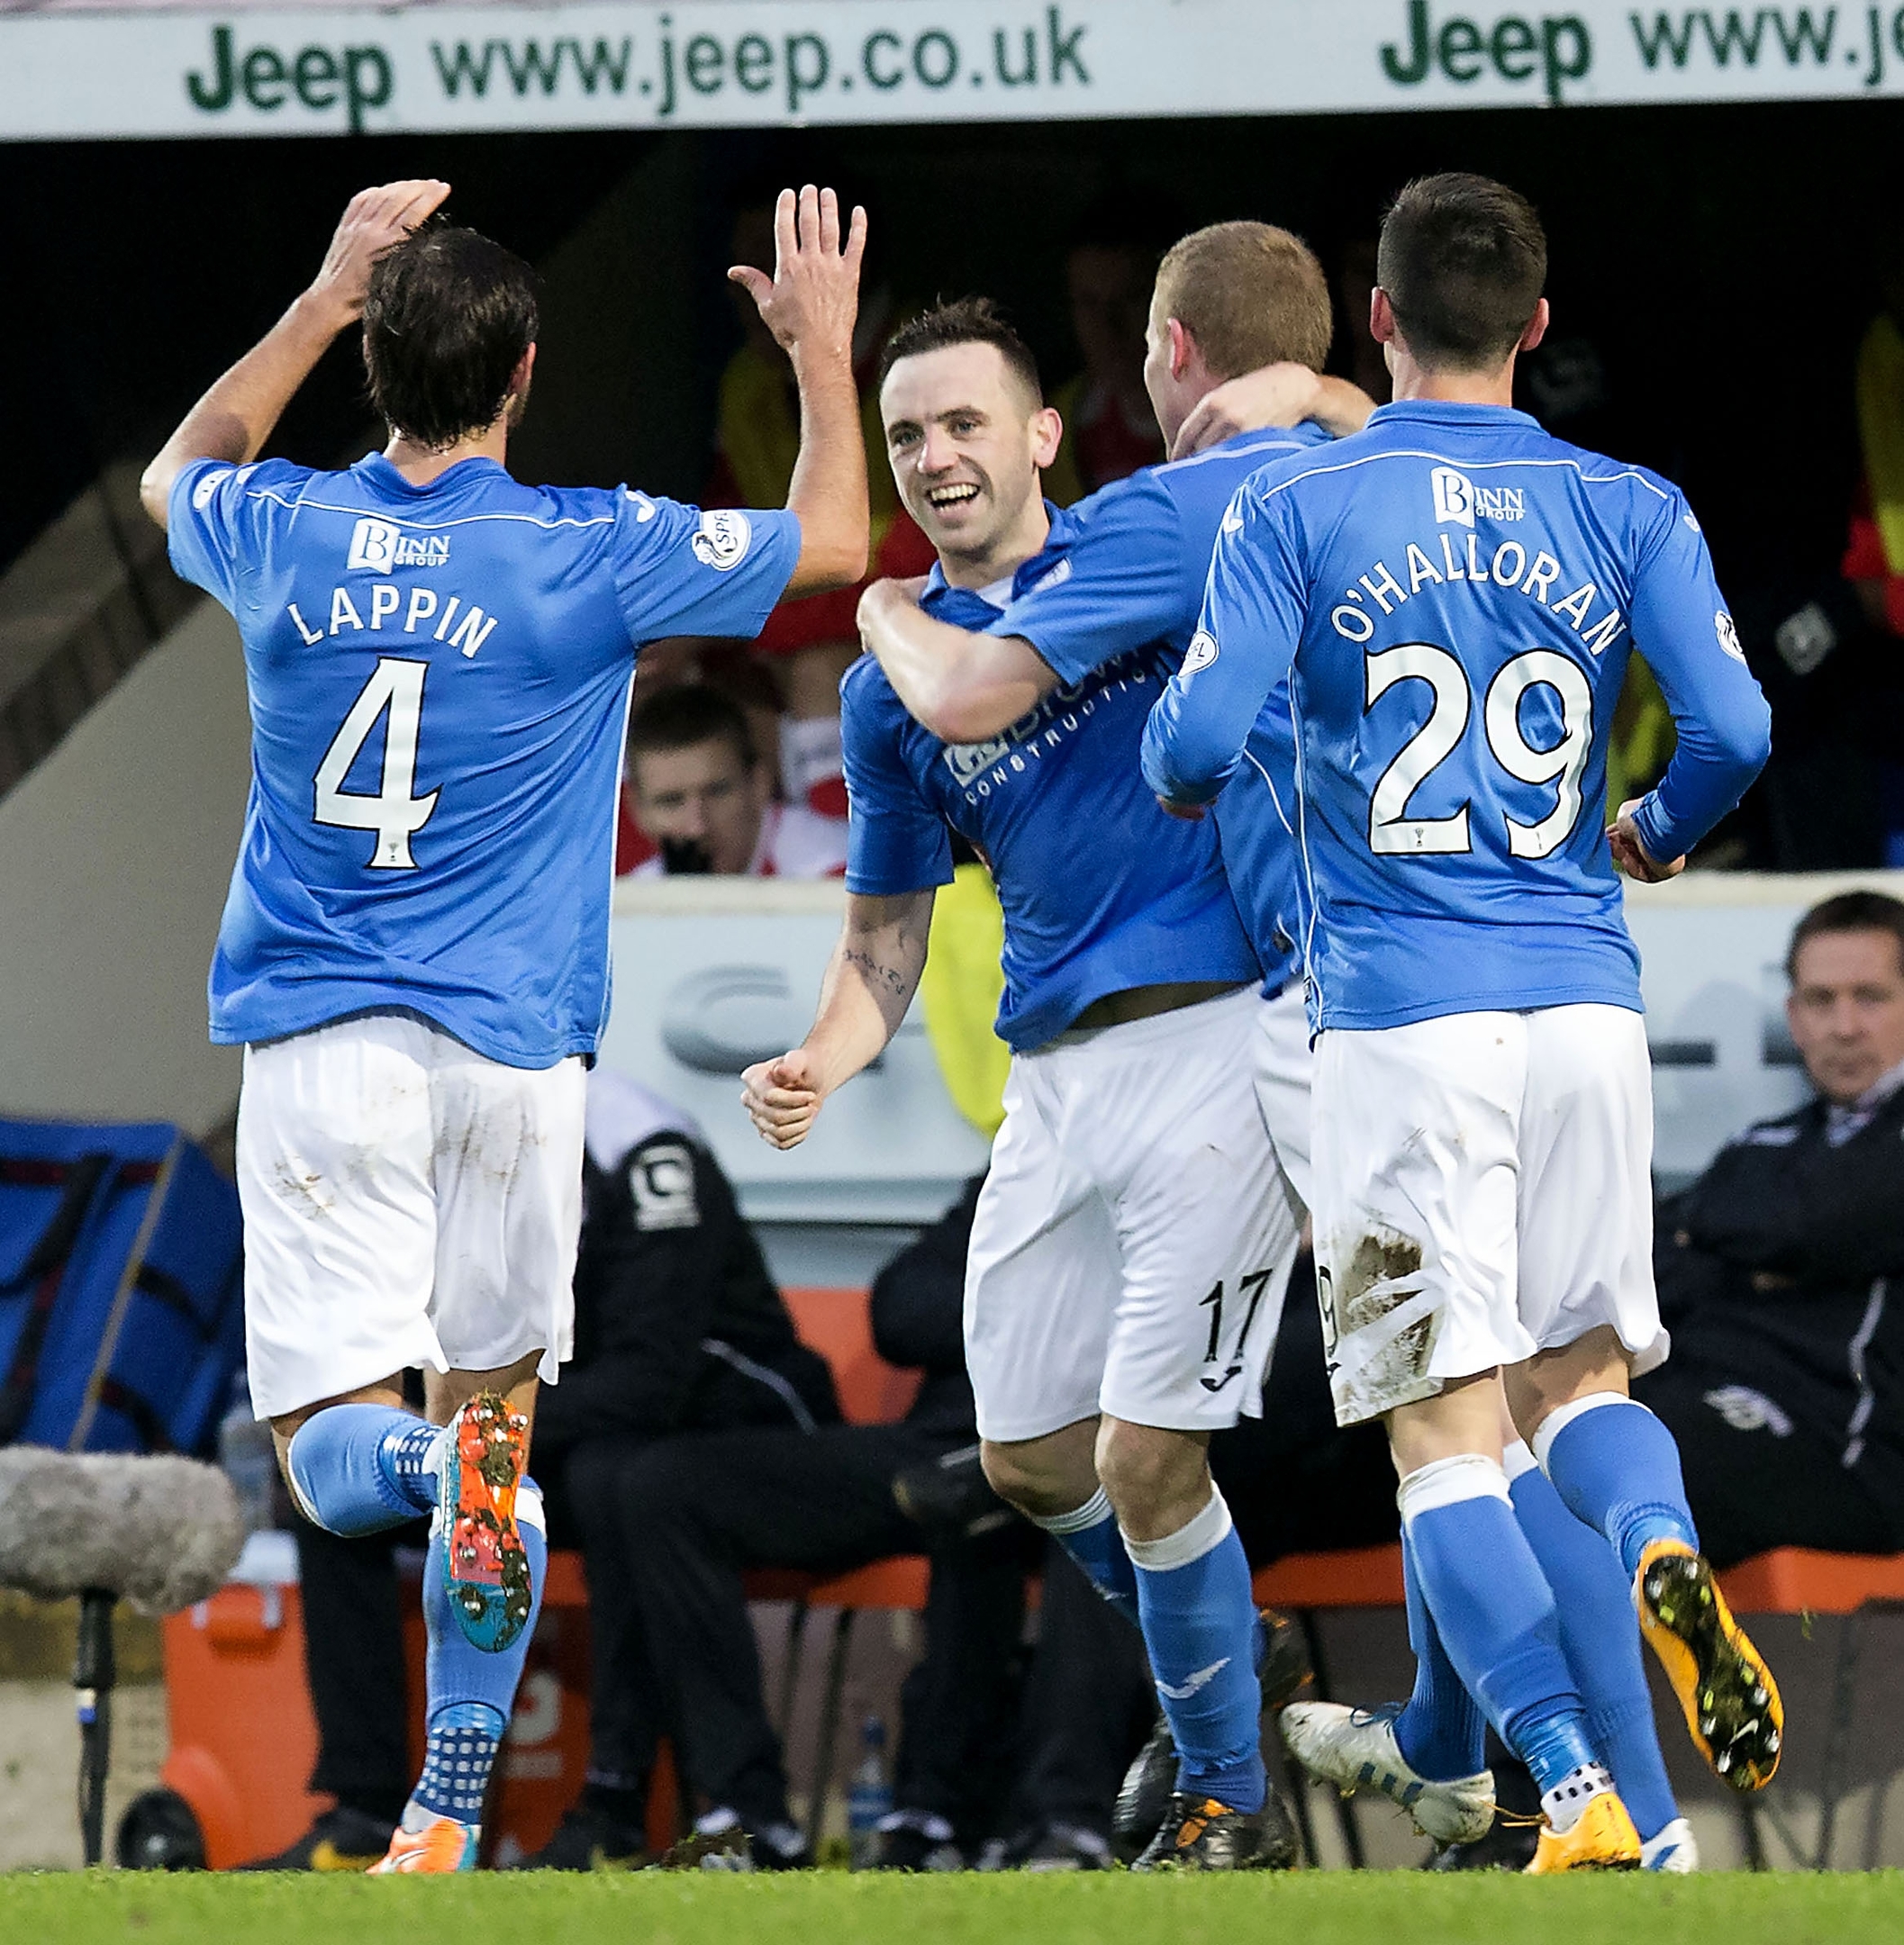 James McFadden celebrates the goal that turned out to be the winner.